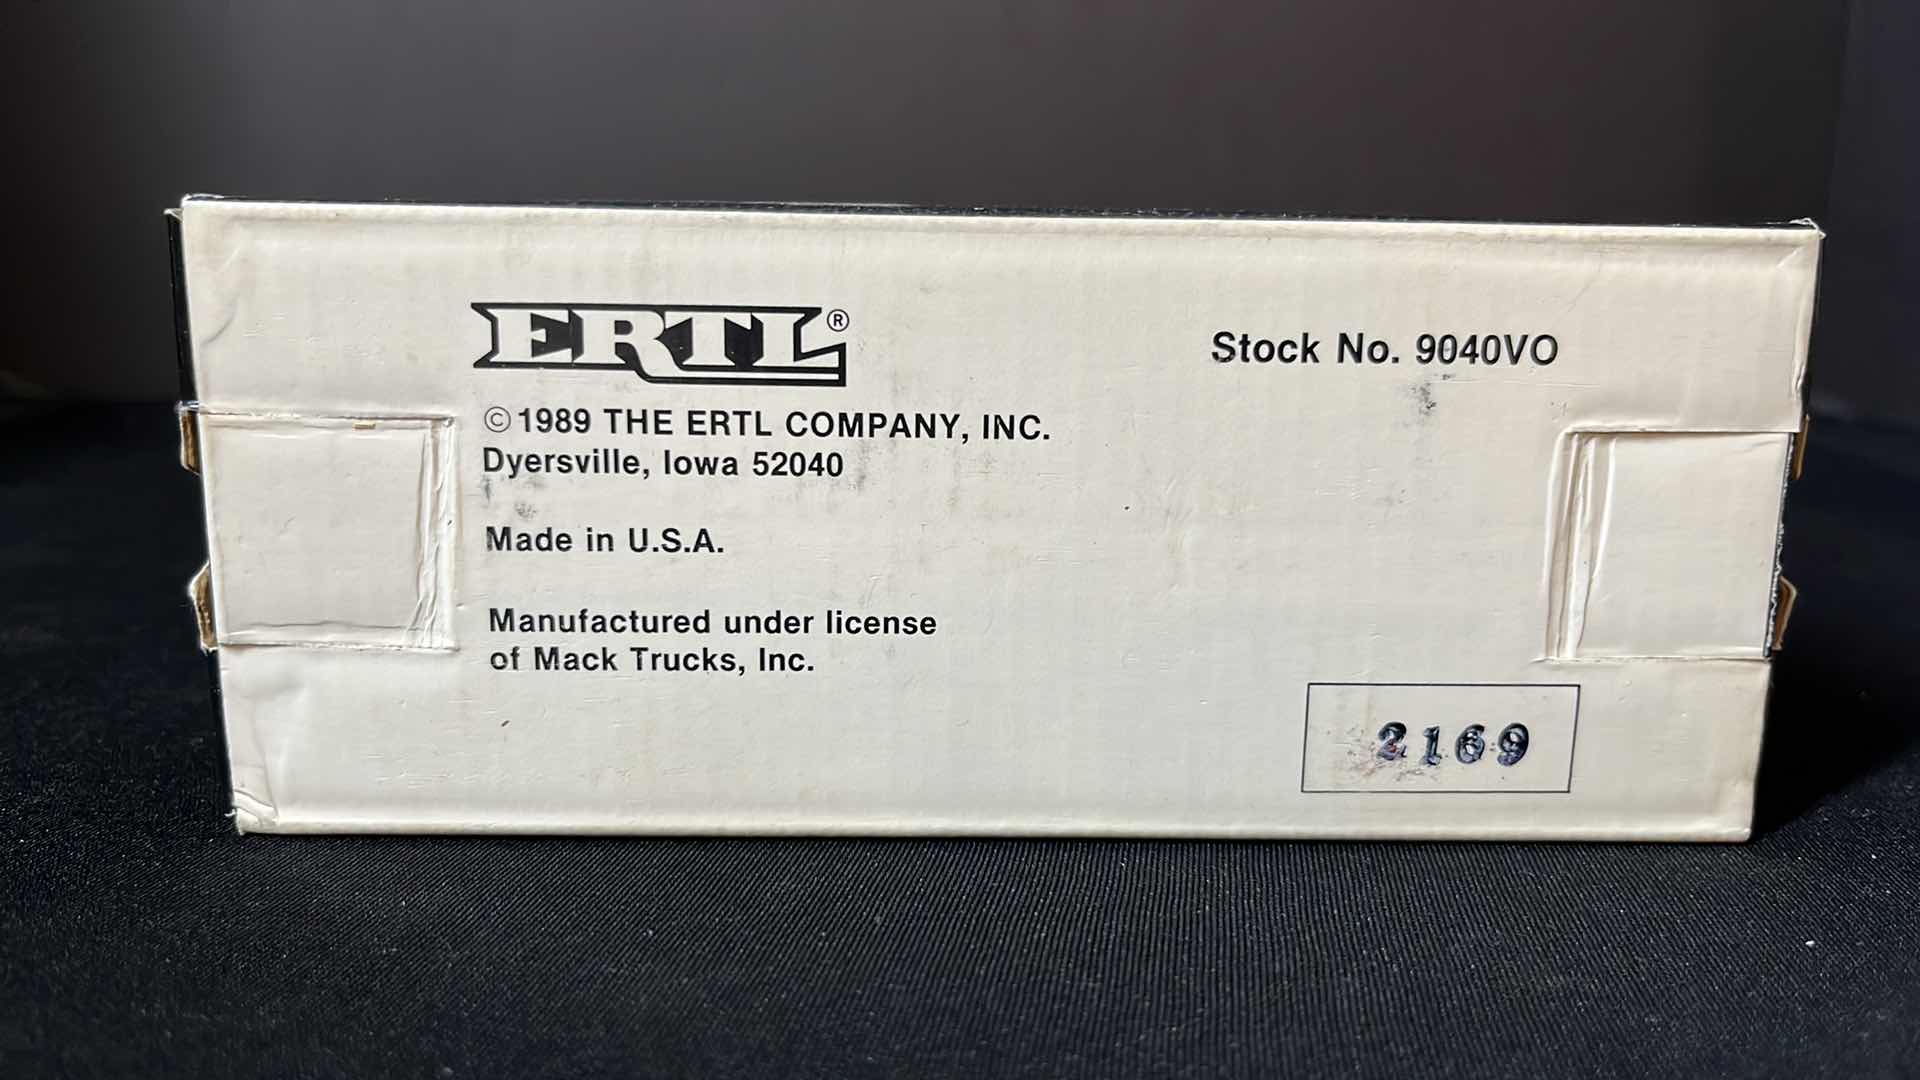 Photo 9 of ERTL DIE-CAST METAL LIMITED EDITION TEXACO 1925 MACK BULLDOG LUBRICANT TRUCK LOCKING COIN BANK W KEY, COLLECTORS SERIES #6, 1989 (STOCK NO 9040VO)